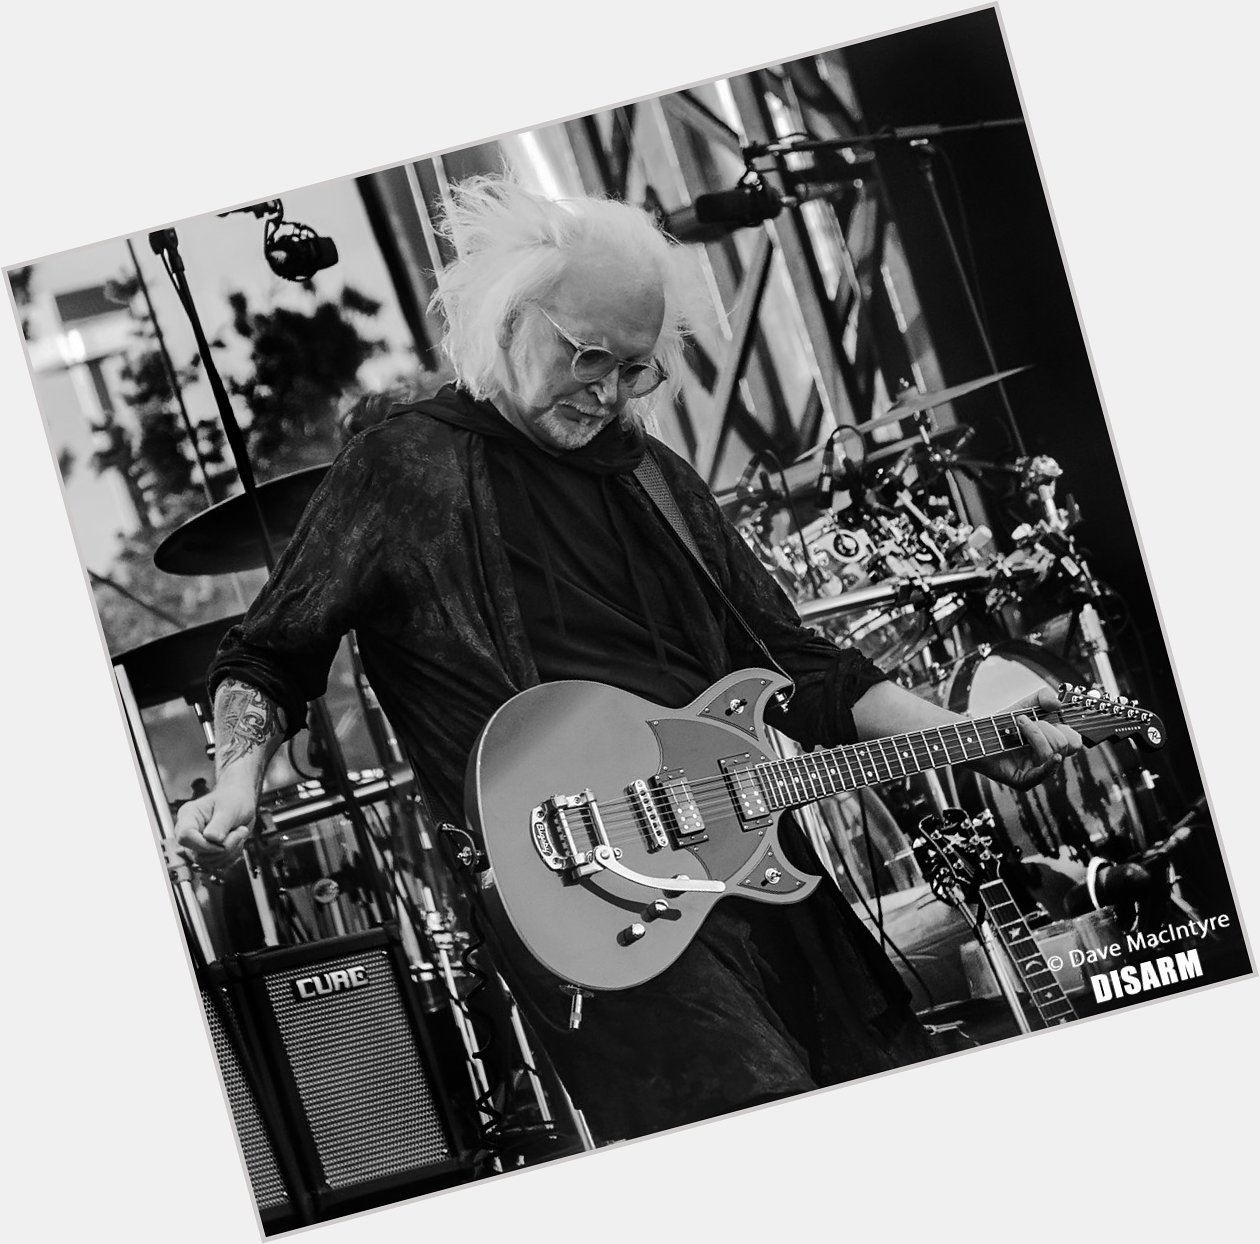 Wishing a very happy birthday to Reeves Gabrels today! 